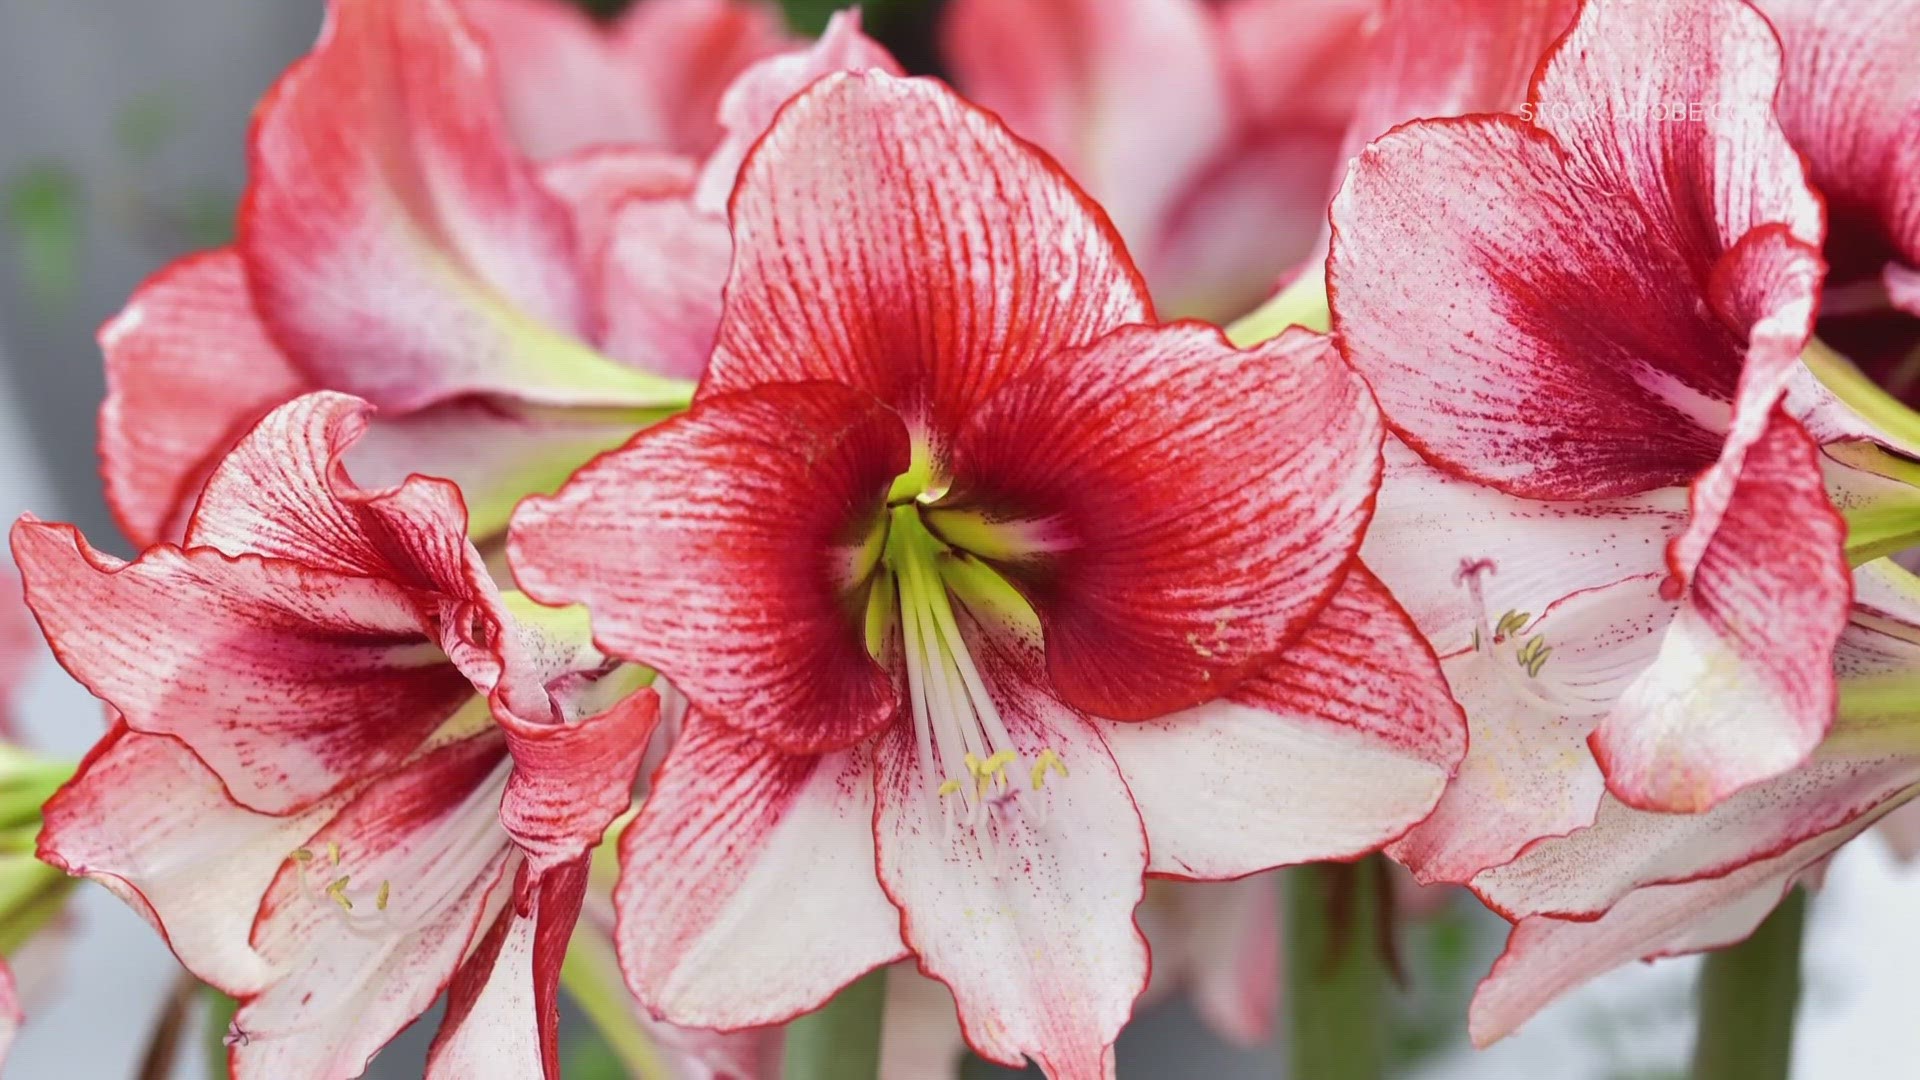 Paperwhites and amaryllis add greatly to holiday displays. These winter-blooming bulbs are really easy to grow: just plant and add water.